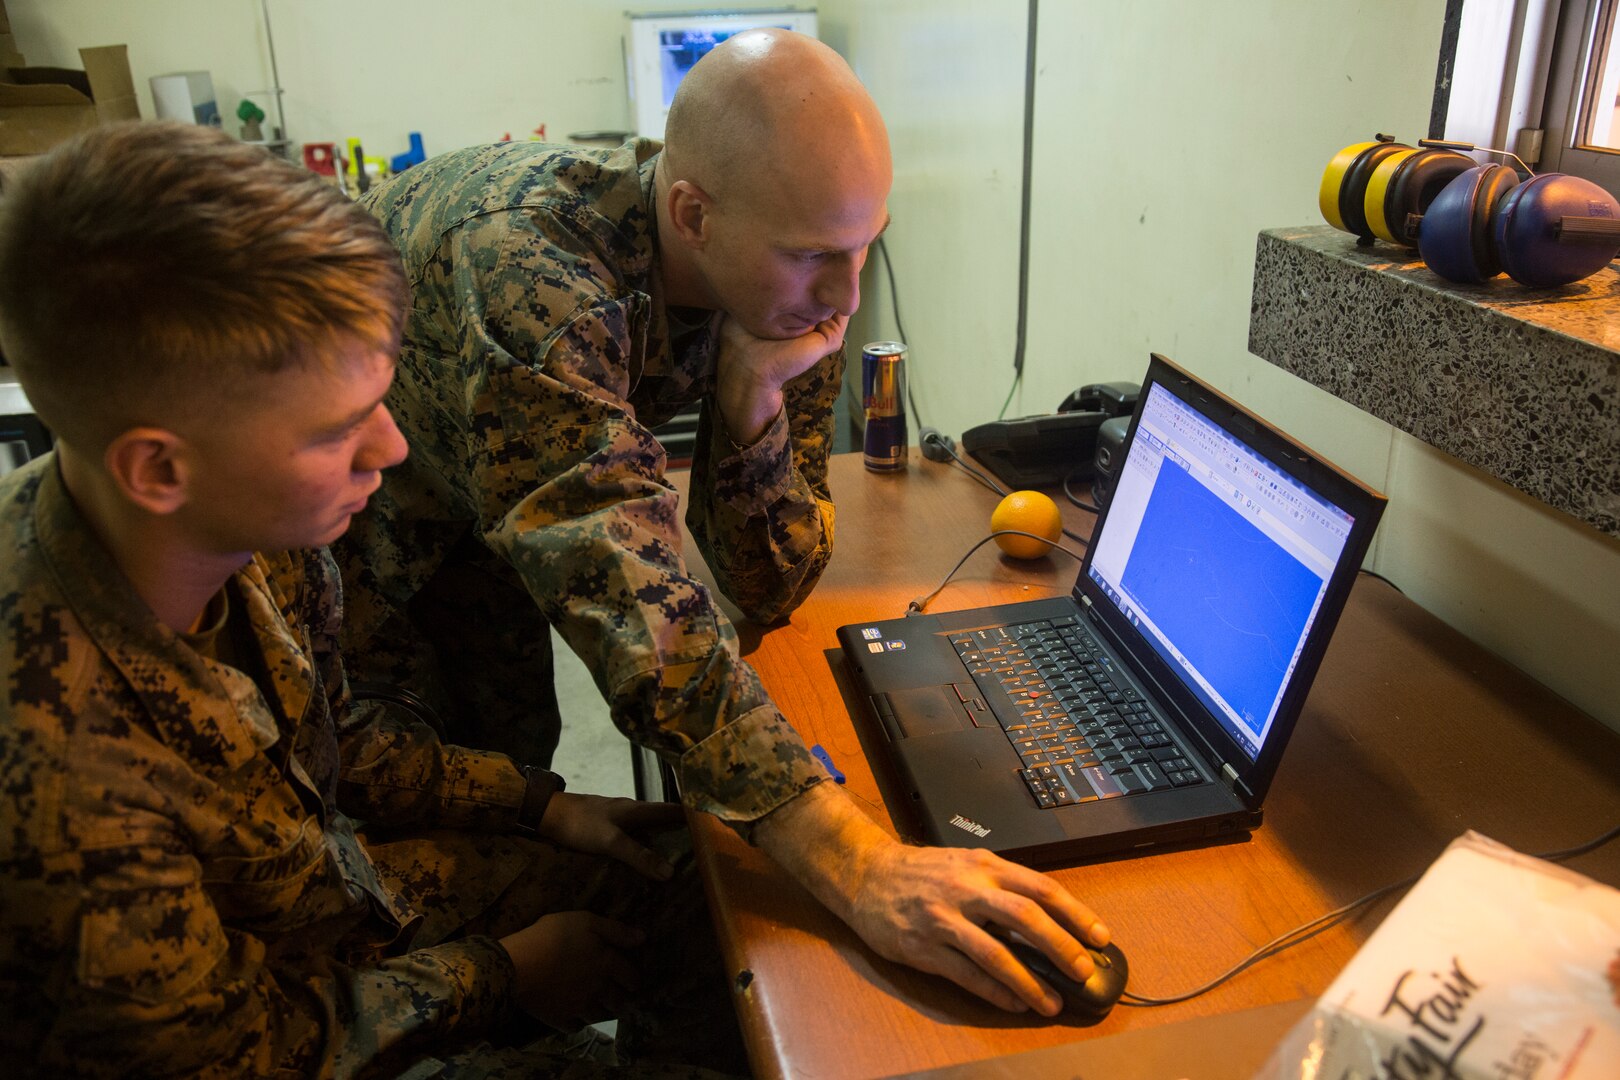 Gunnery Sgt. Justin A. Horn, right, the General Support Maintenance Company metal shop chief and native of Greene, N.Y., and Lance Cpl. Jason Lowes, left, a repair shop machinist and native of Marion, Mich., use software programs to draft their metal work before manufacturing it, Nov. 21, 2017, at Camp Kinser, Okinawa, Japan. Marines at the GSM, 3rd Maintenance Battalion, 3rd Marine Logistics Group, use computer-aided drafting programs that generate and send codes to their machines in order to fabricate hardware.